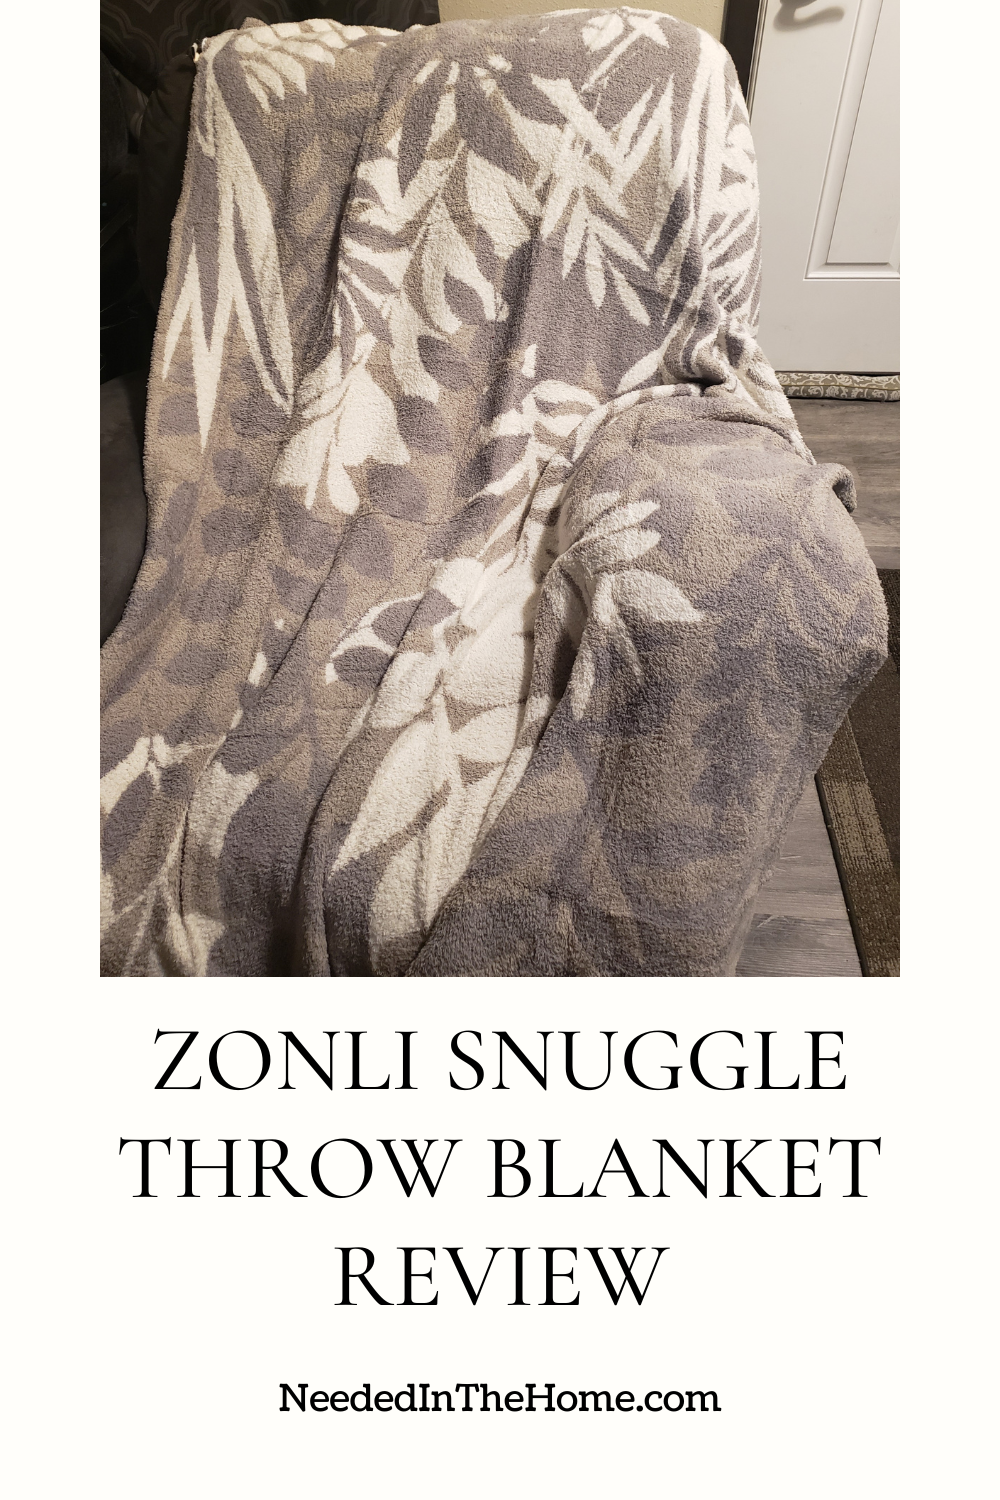 throw blanket on a rocking chair with a leaf design zonli snuggle throw blanket review neededinthehome